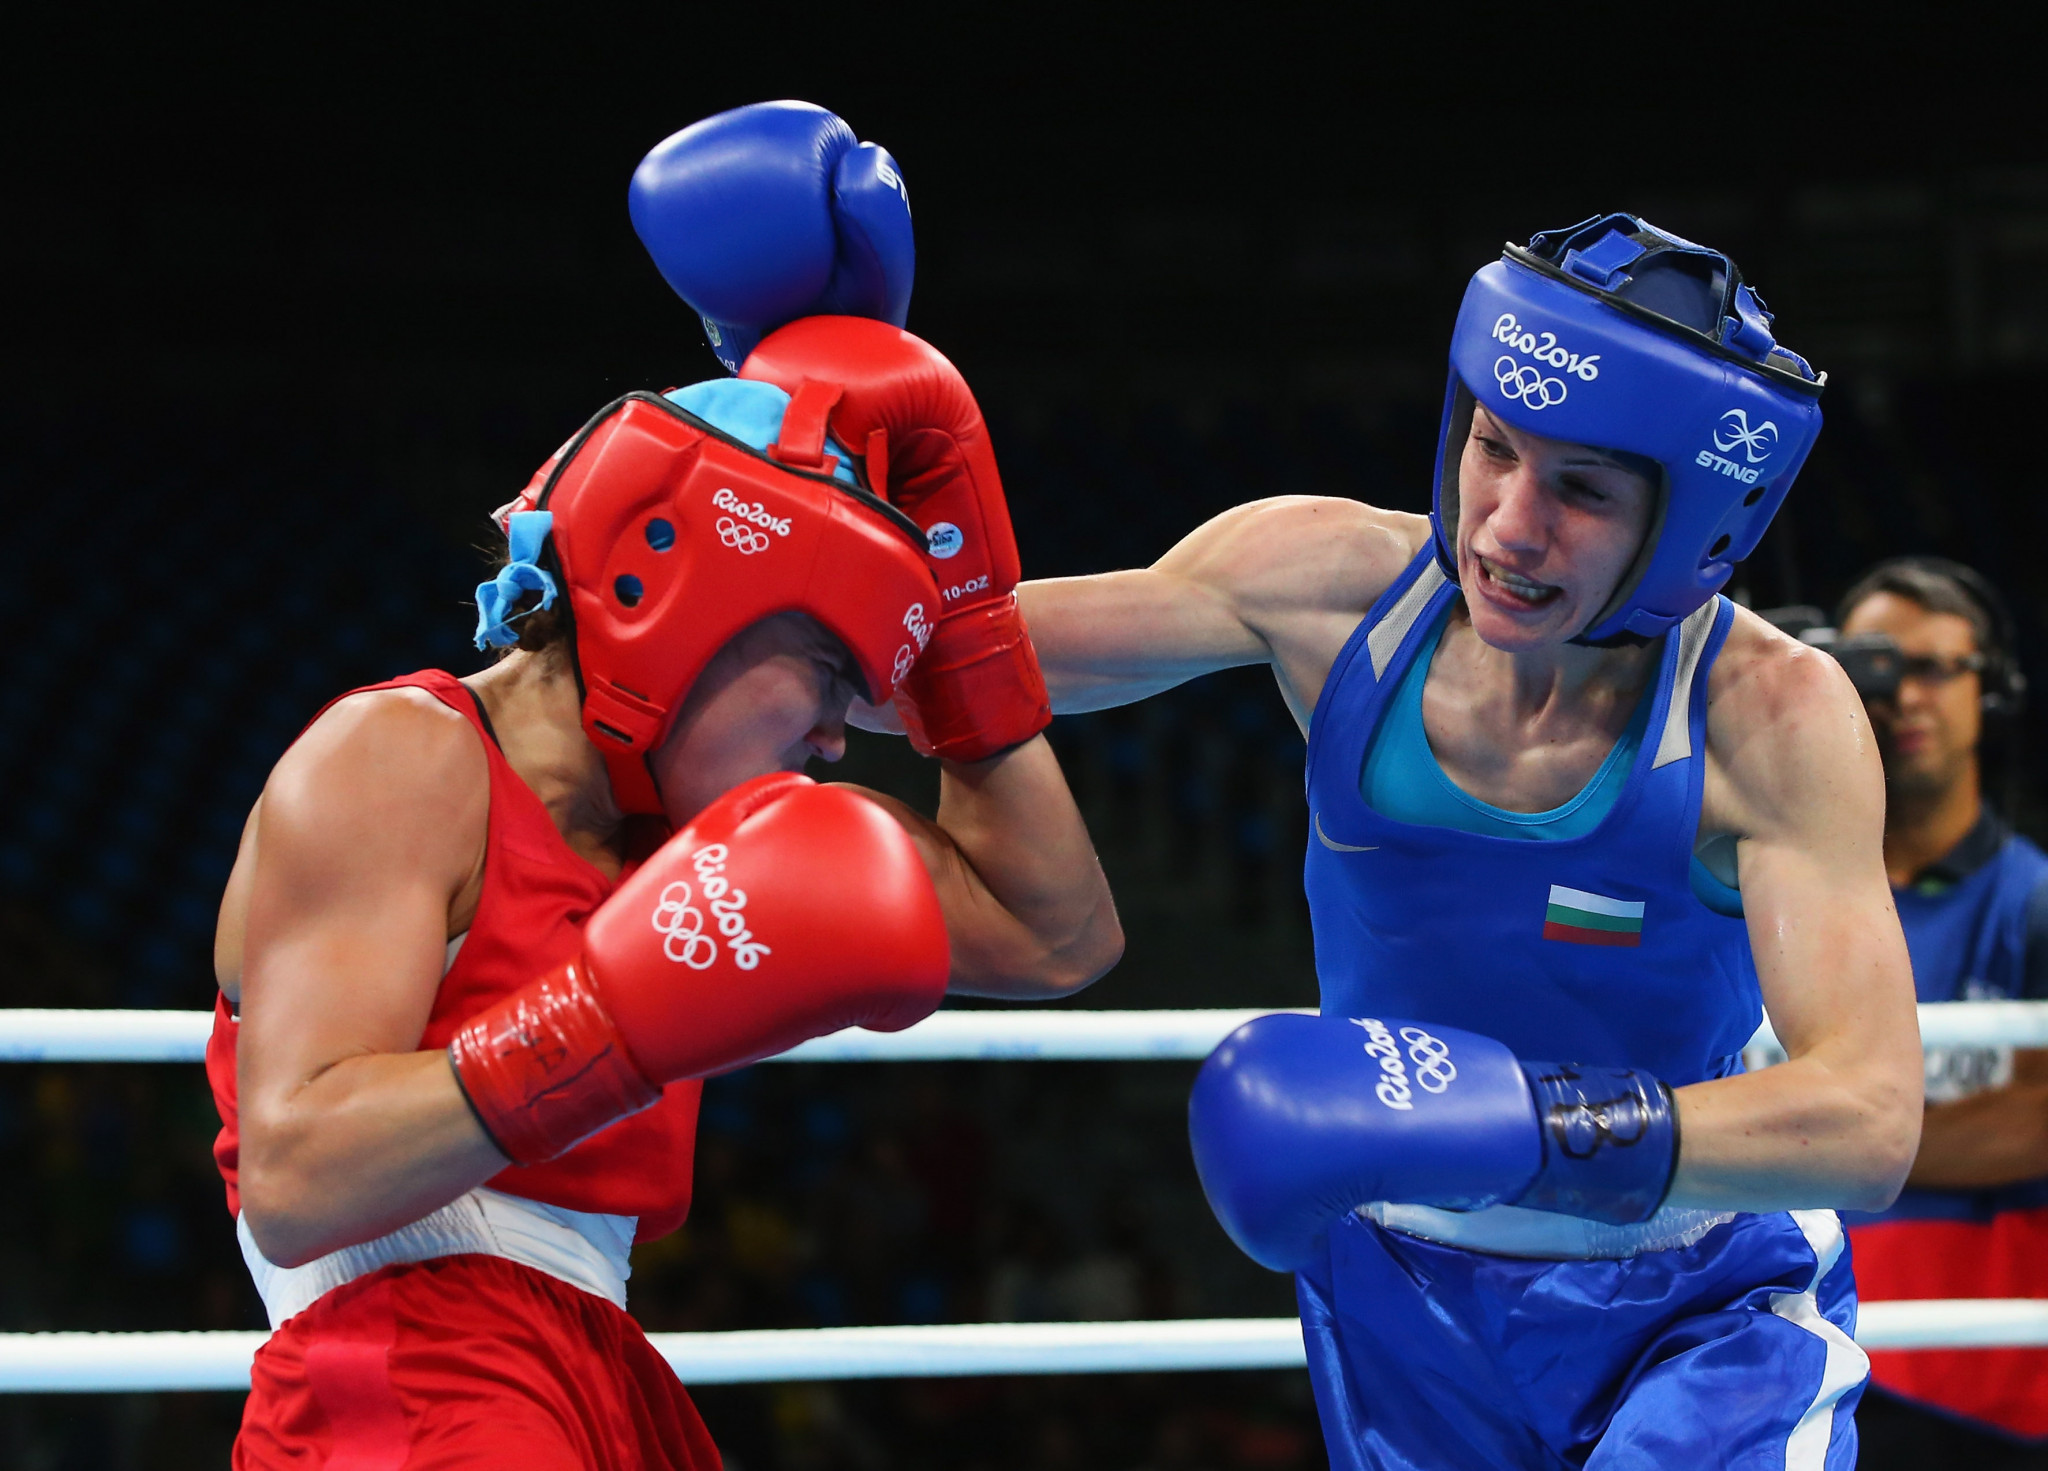 Bulgarian fighter accuses judges of corruption after losing preliminary bout at AIBA Women's Boxing World Championships